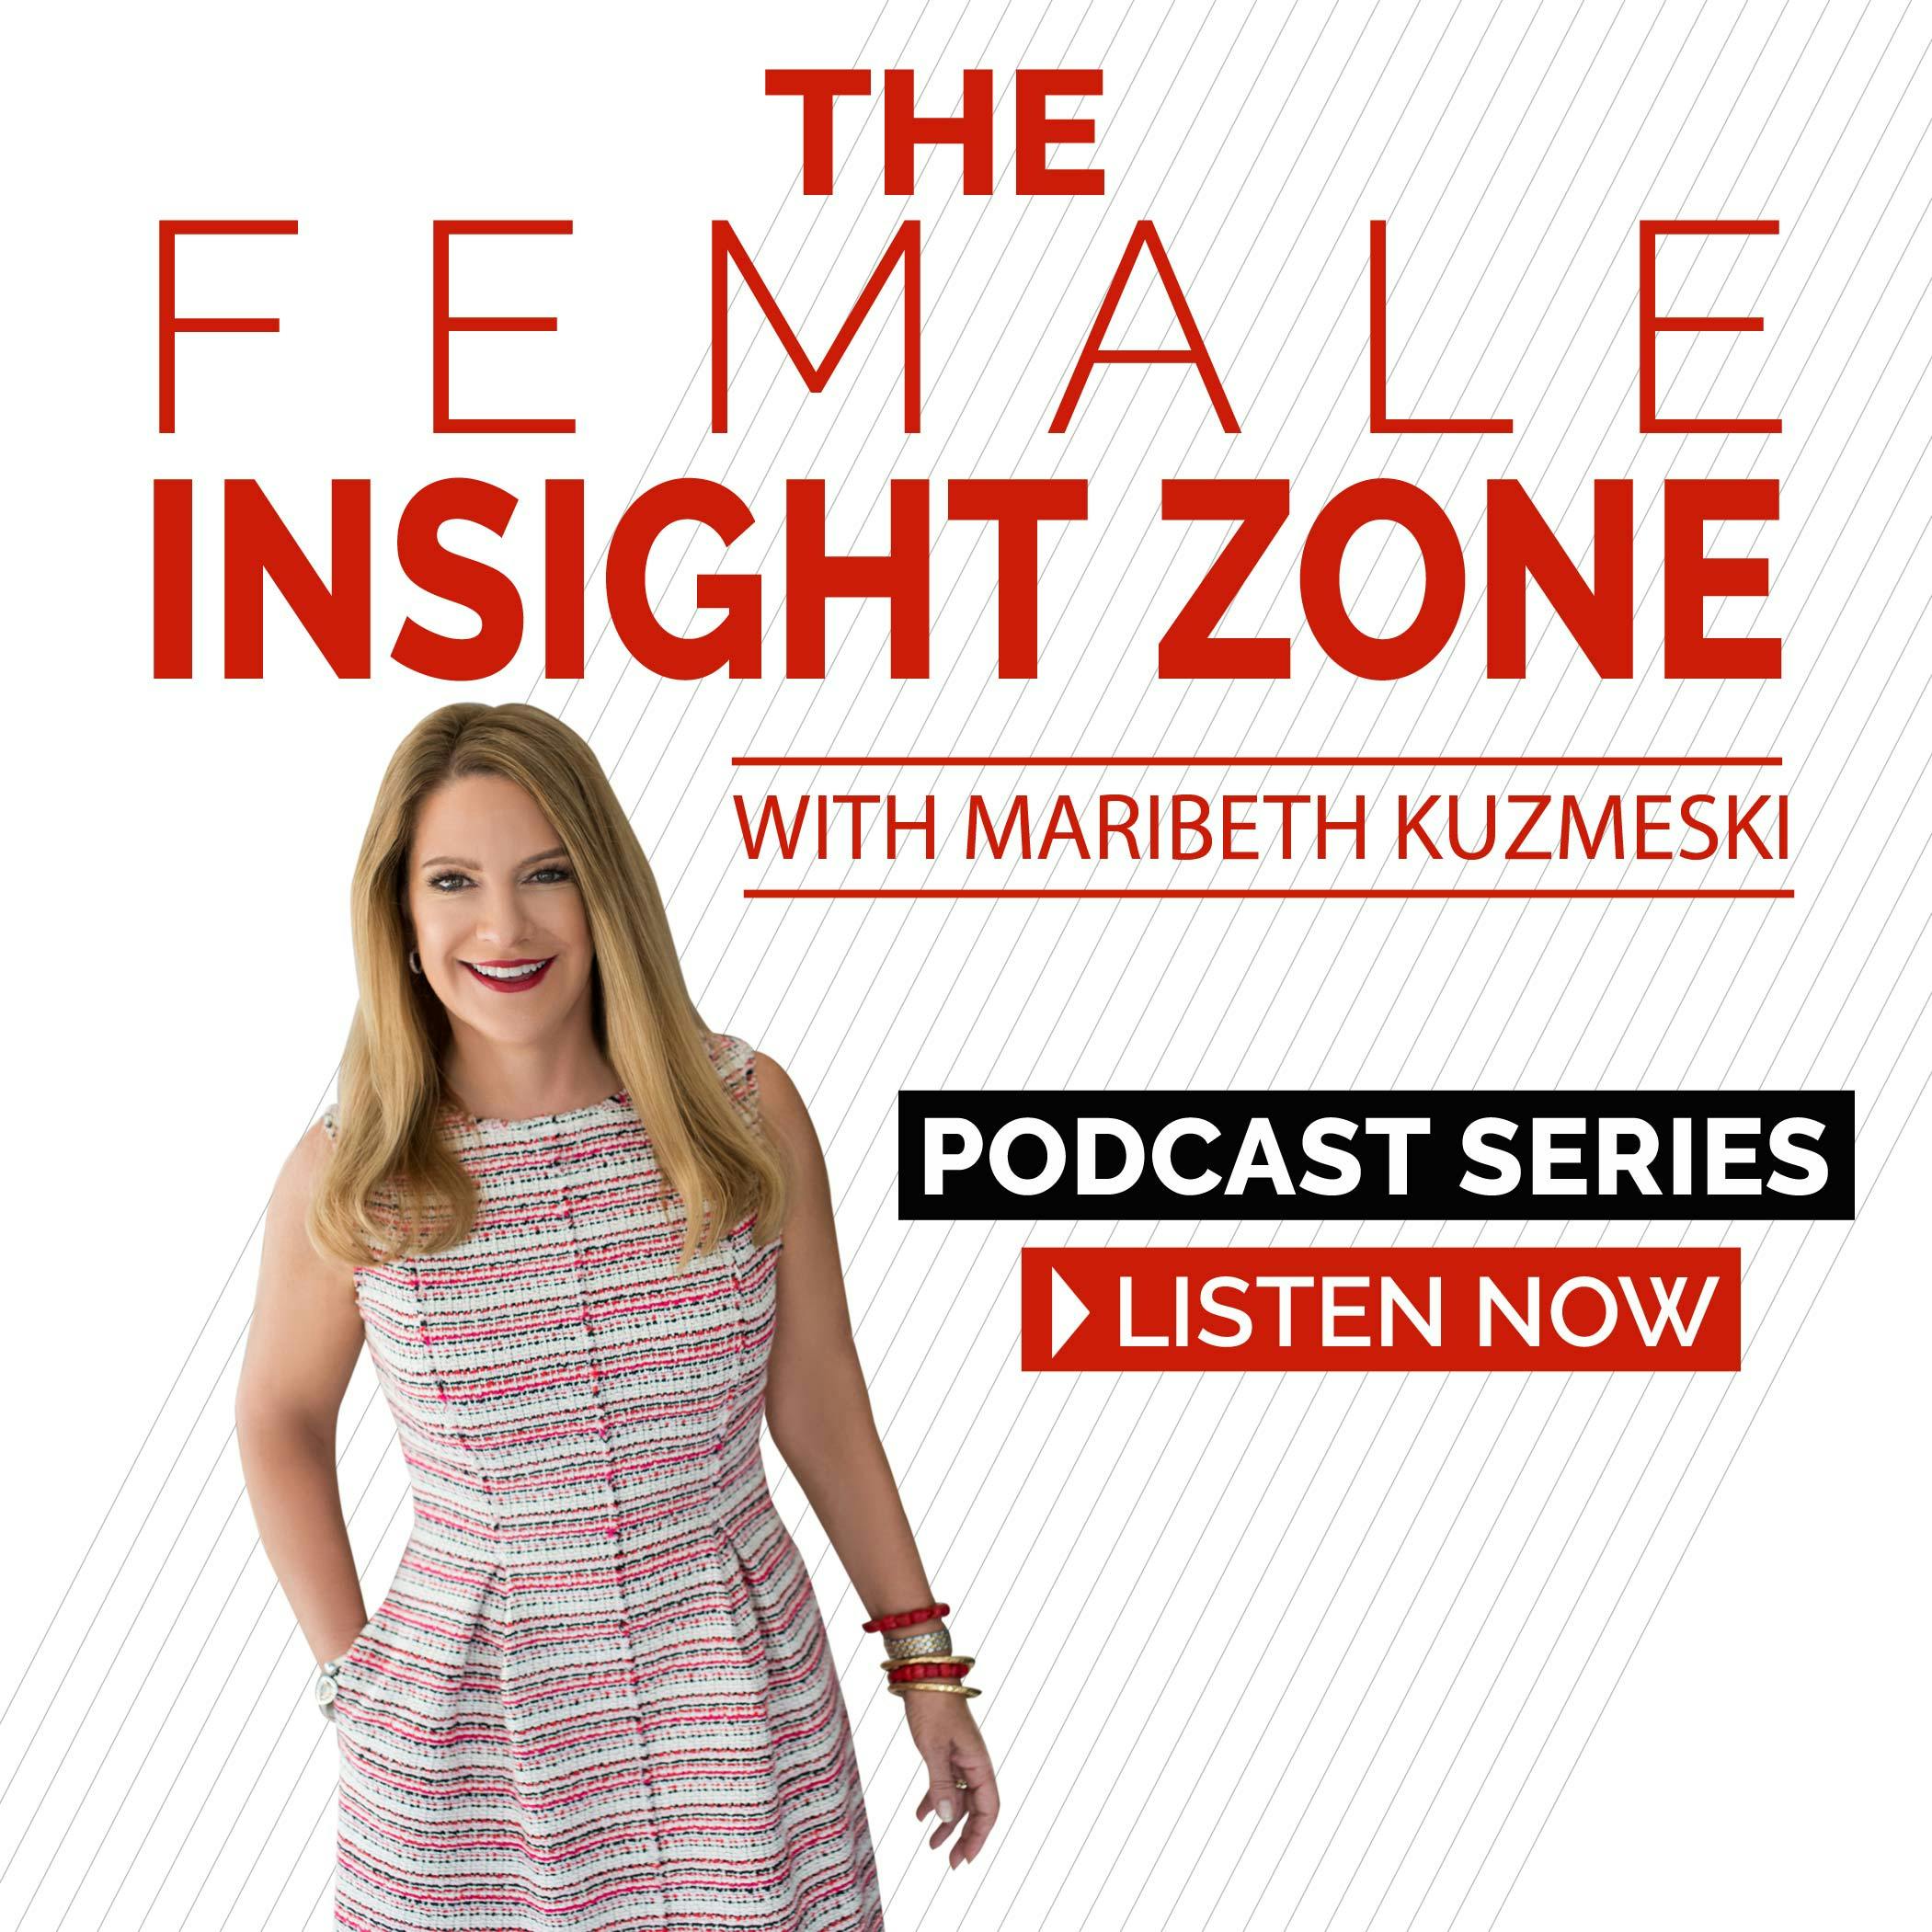 Jessica Higgins: The Separation of Women In Business